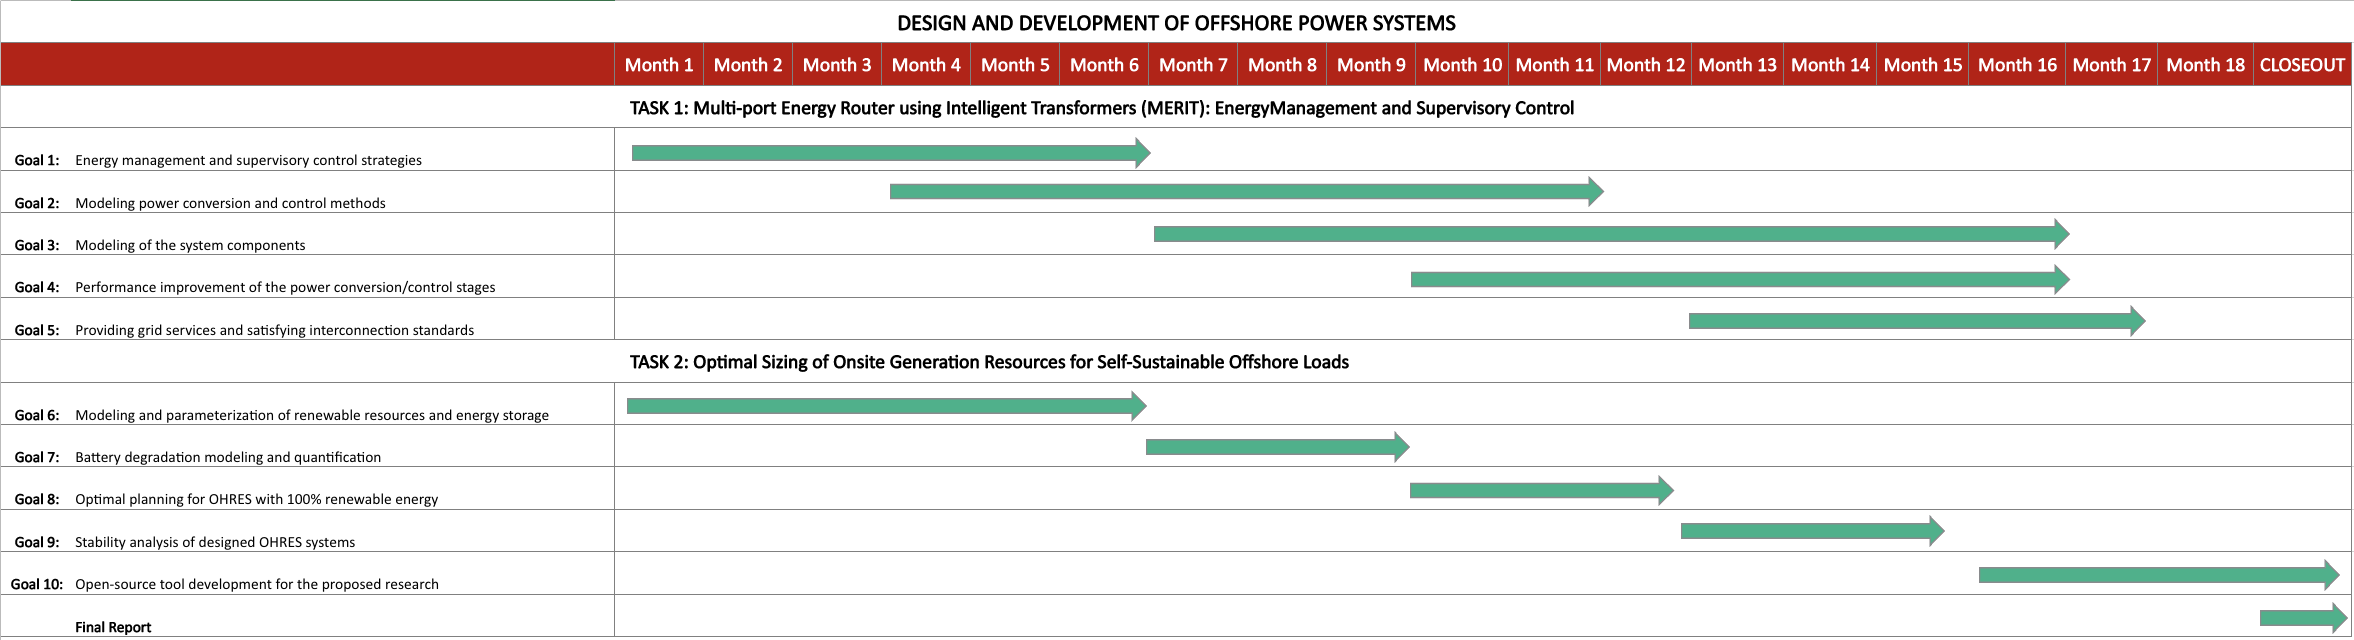 Gannt Chart - Design and Development of offshore power systems